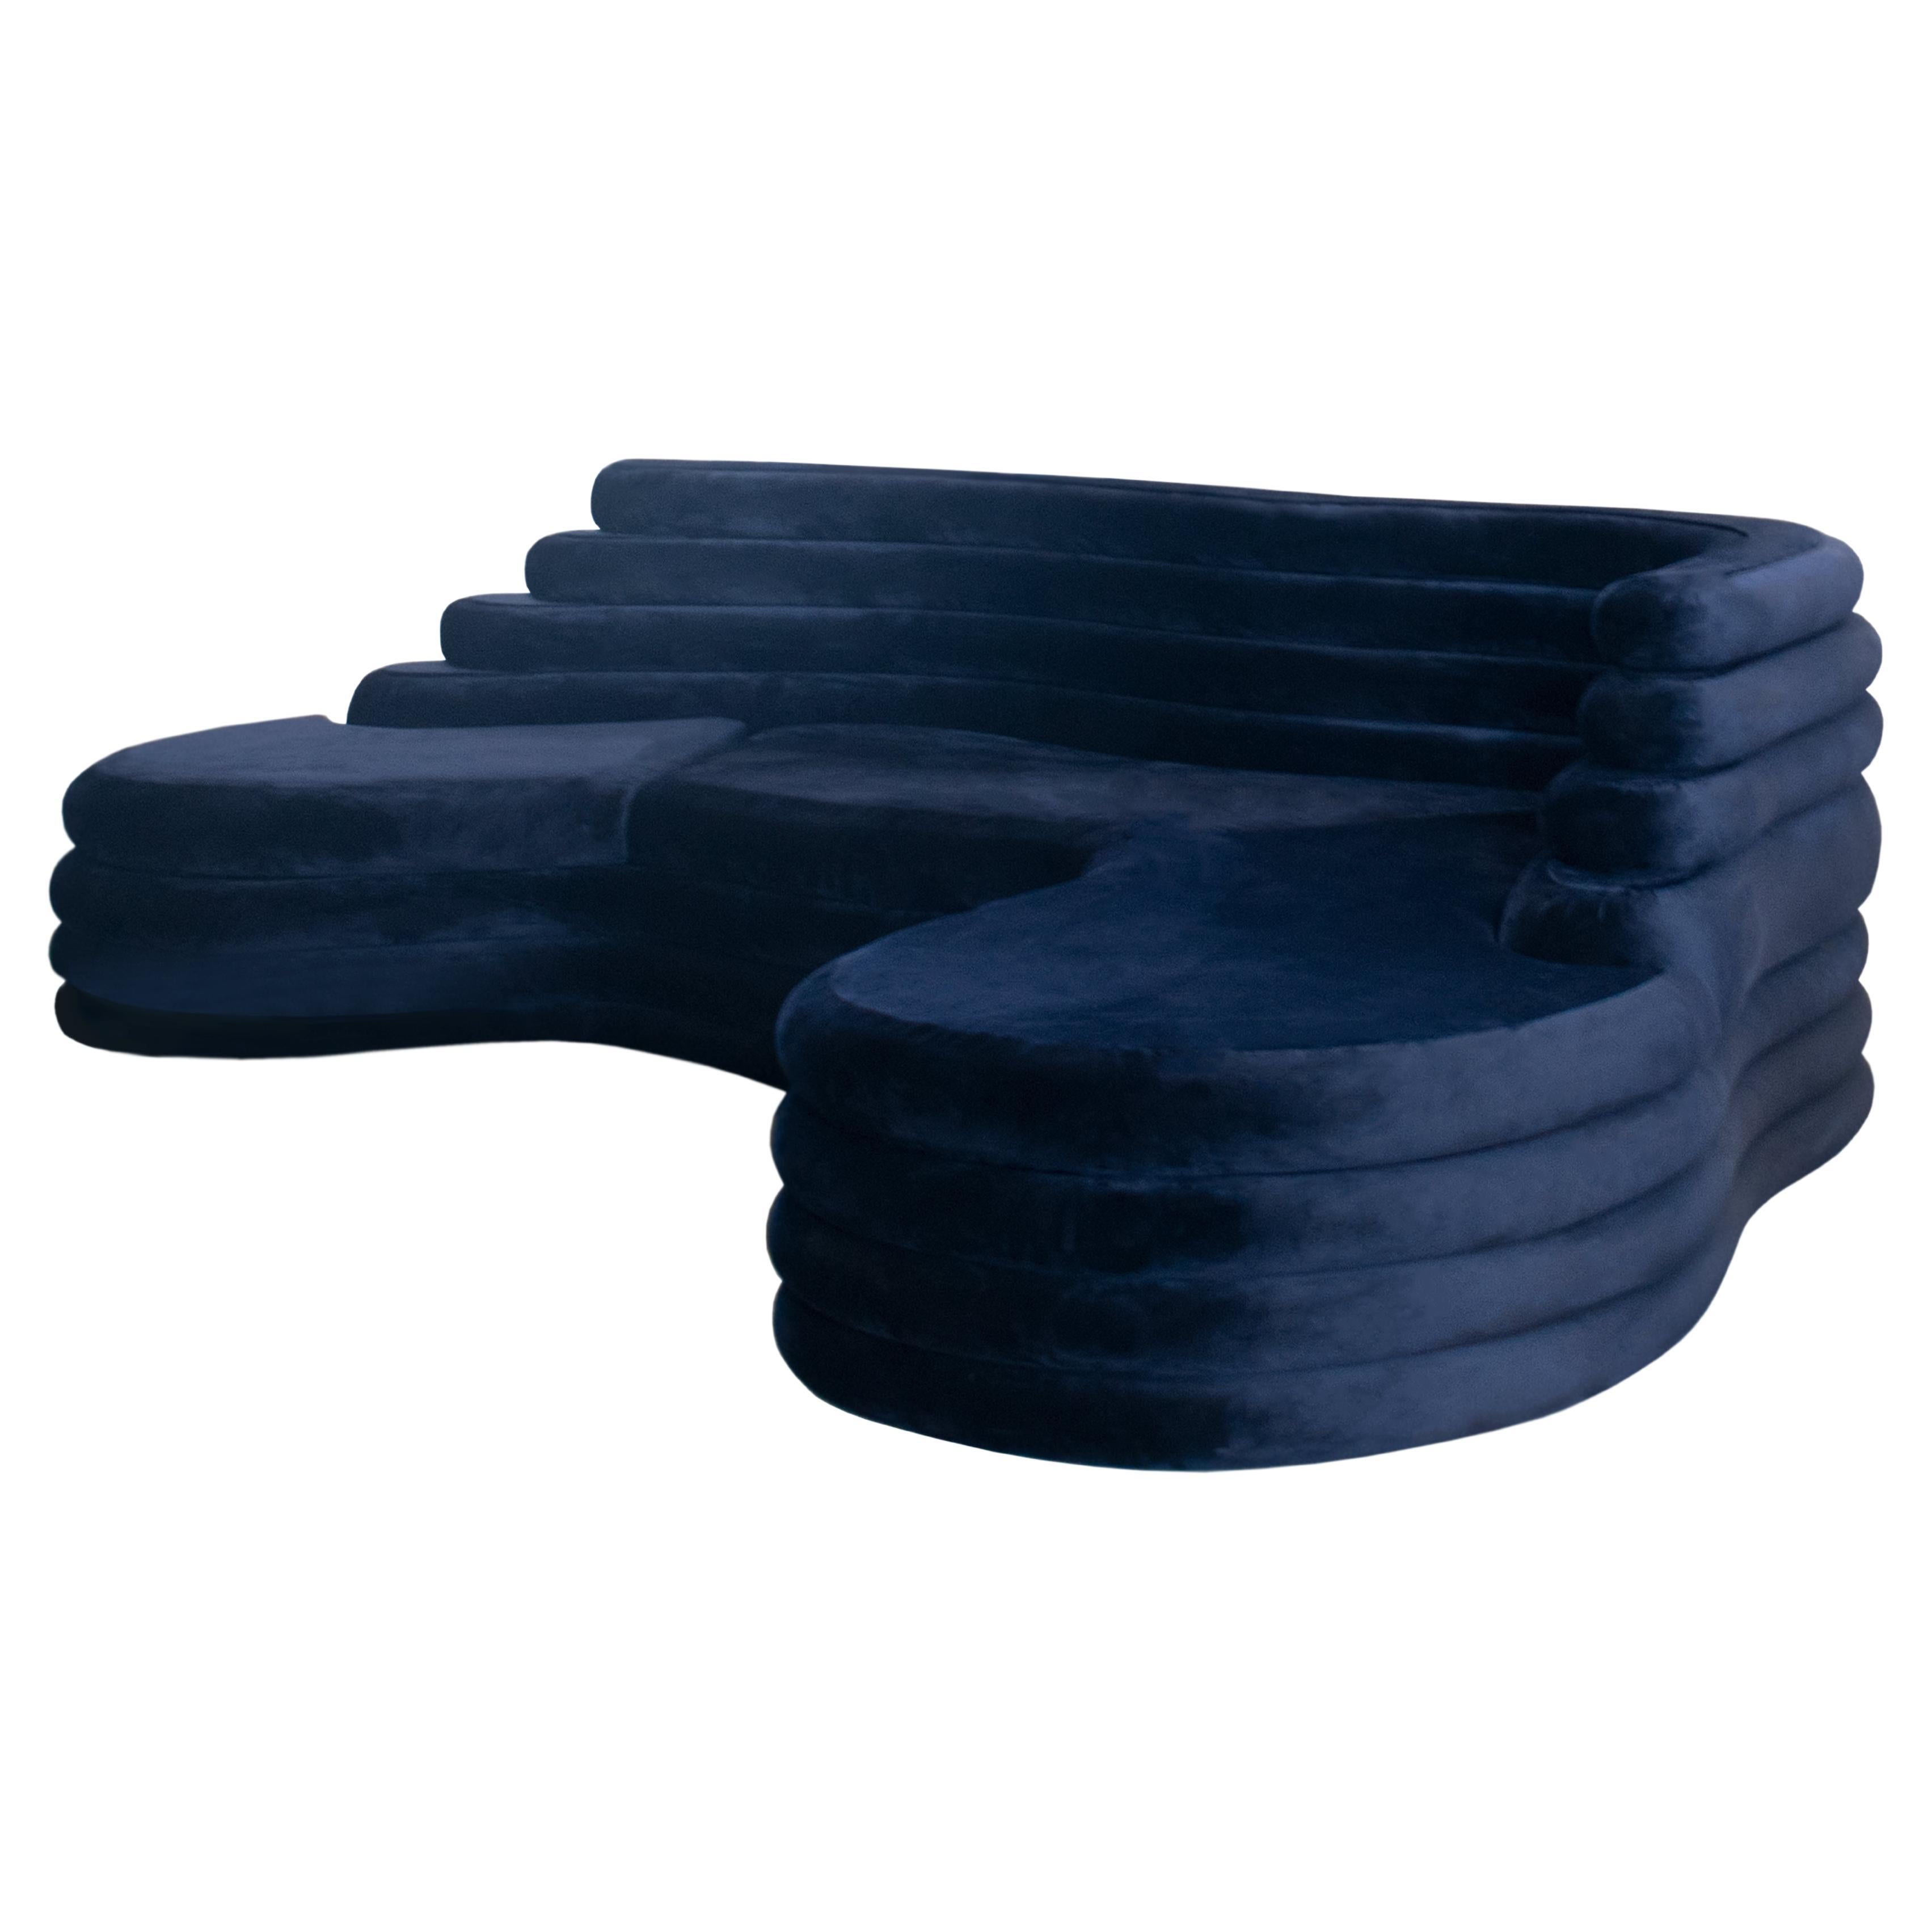 EMBRYO Blue Velvet Sofa/ Couch For Sale